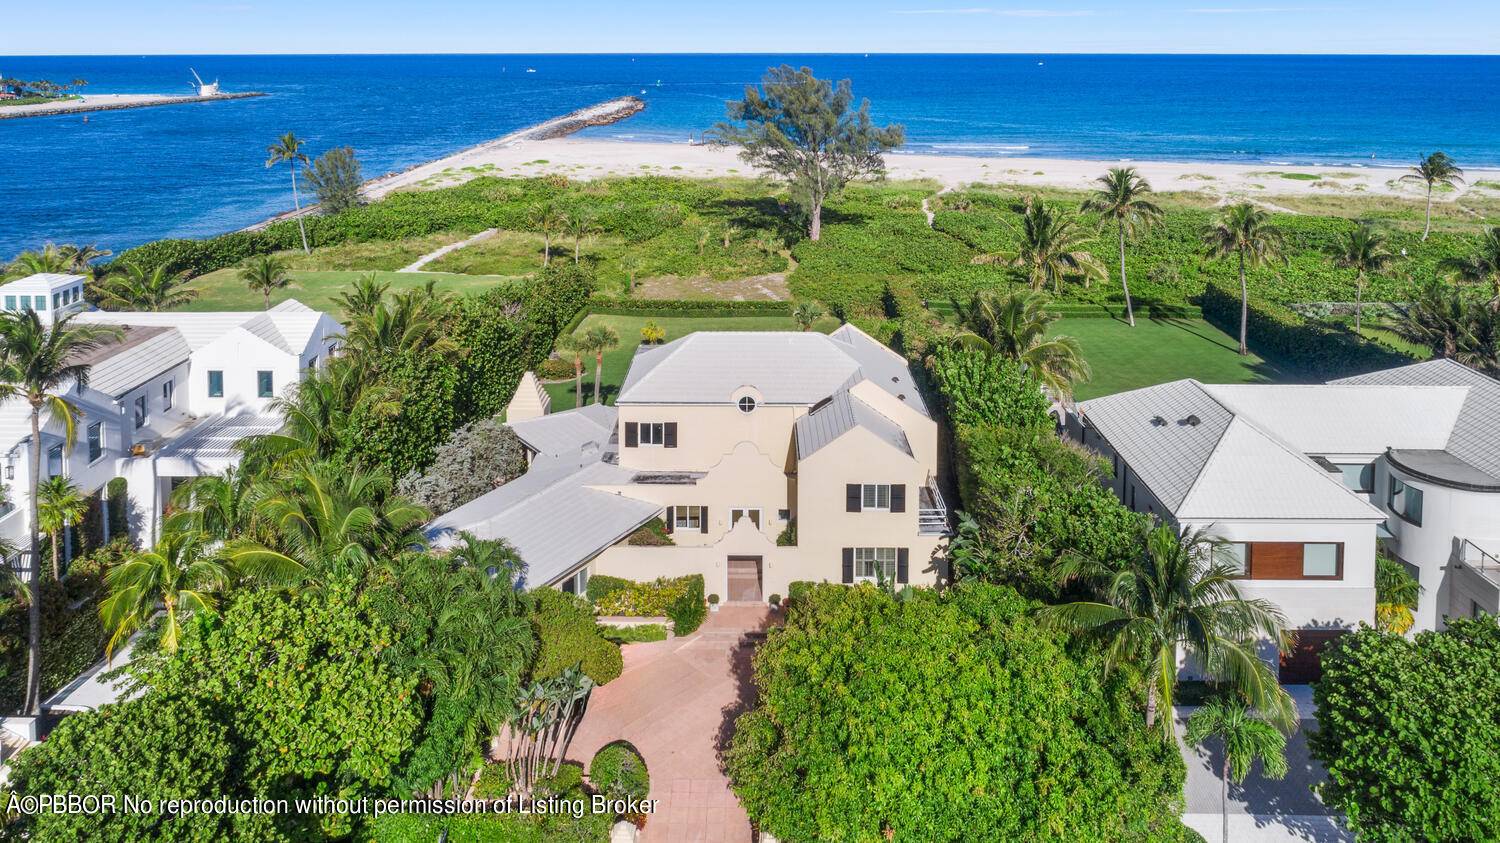 Direct Oceanfront home with private beach and sweeping ocean views from the main primary rooms.